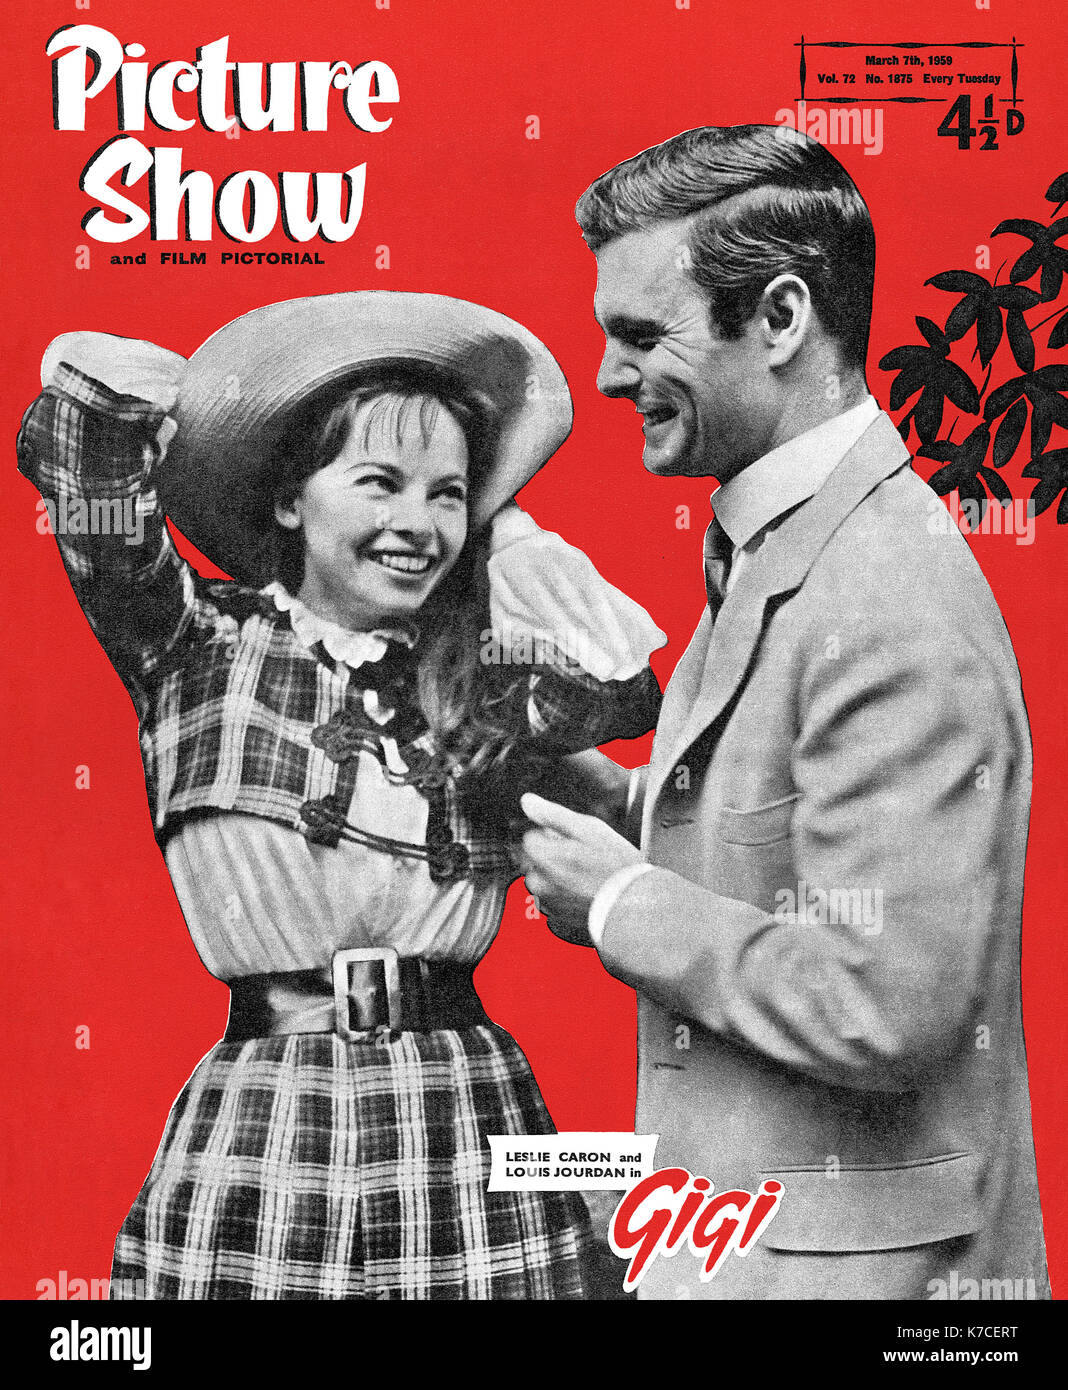 Vintage front cover of Picture Show magazine for 7th March 1959, featuring Leslie Caron and Louis Jourdan in the movie Gigi. Stock Photo